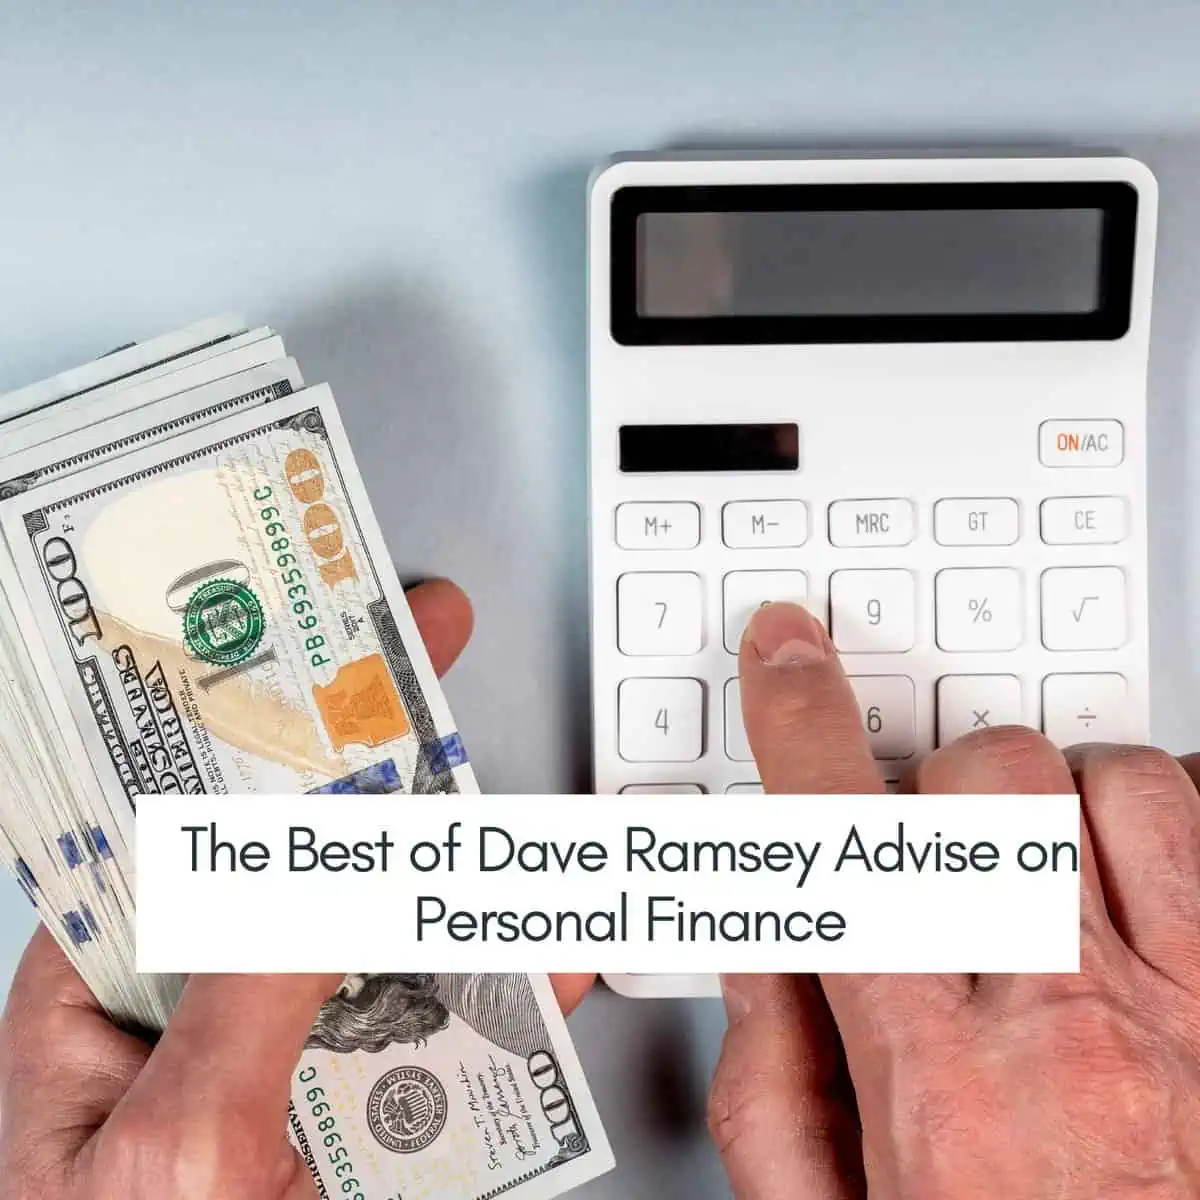 The Best of Dave Ramsey Advise on Personal Finance